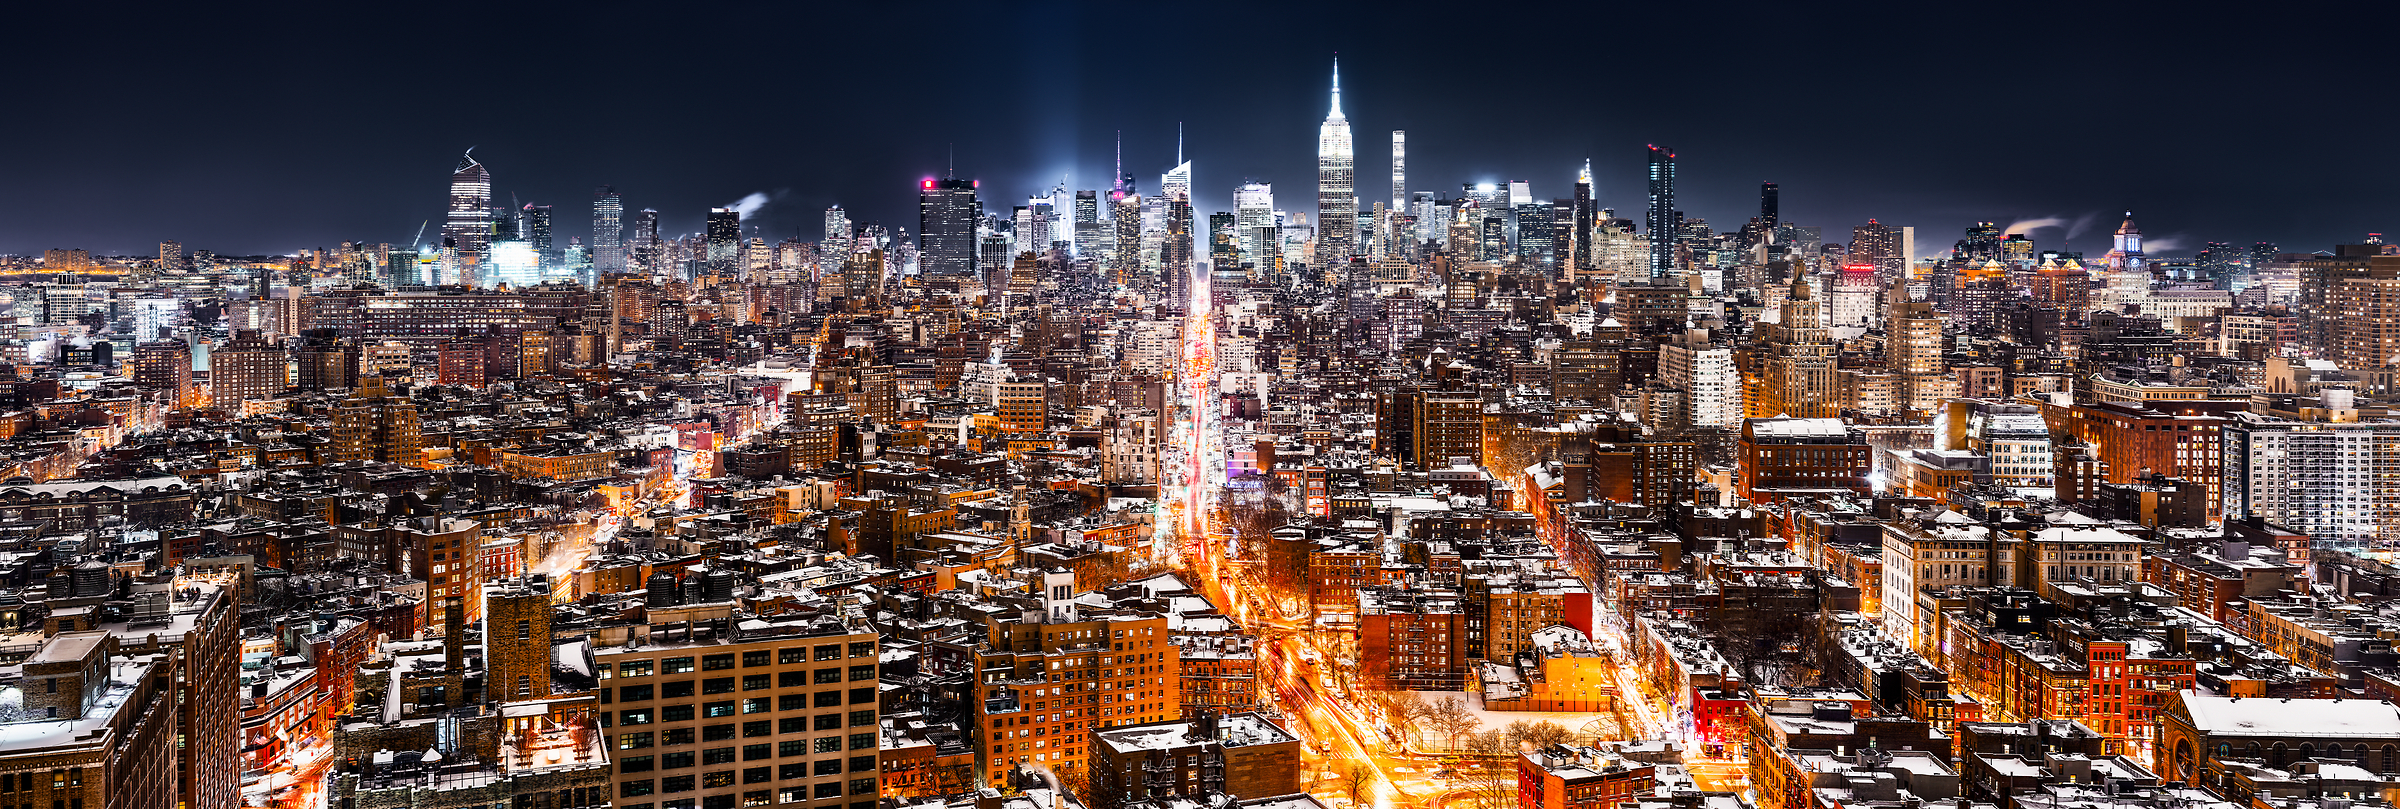 5,910 megapixels! A very high resolution, large-format VAST photo print of the NYC skyline at night; cityscape fine art photo created by Dan Piech in Midtown Manhattan, New York City.